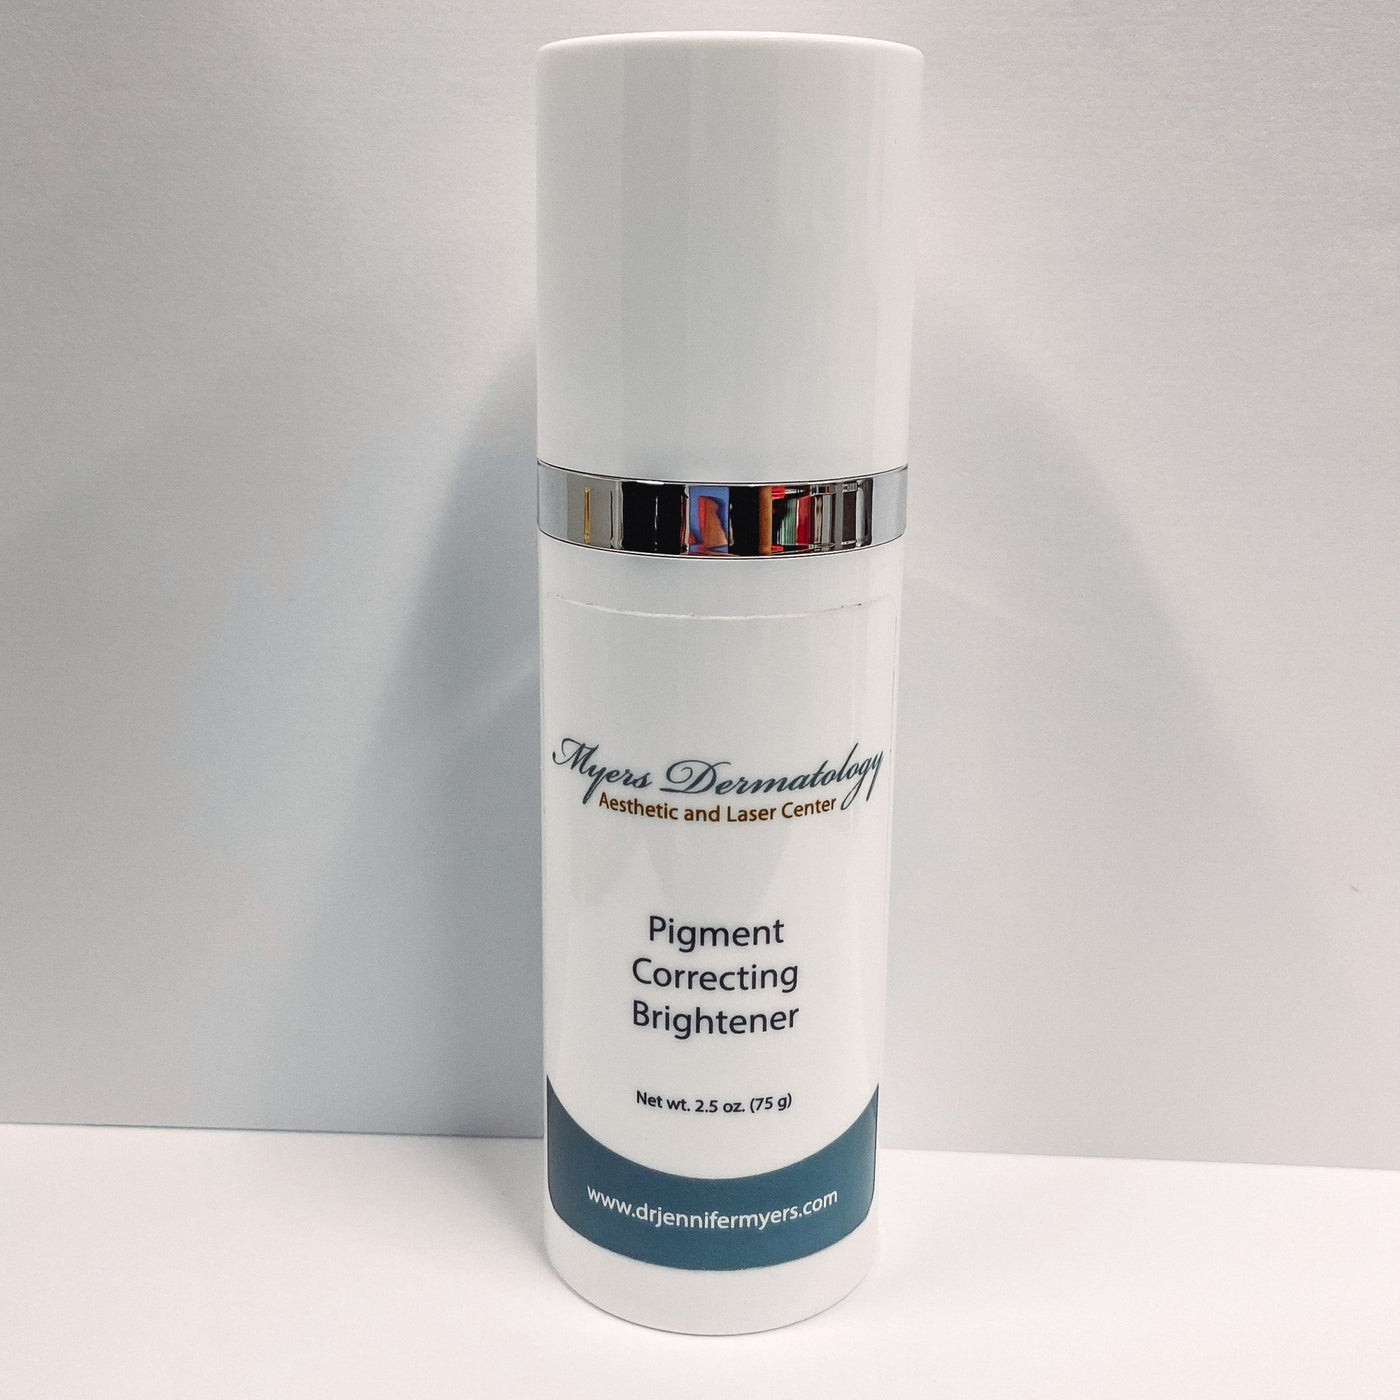 Pigment Correcting Brightener (Daily Glow) - Myers Dermatology & Clinical Spa